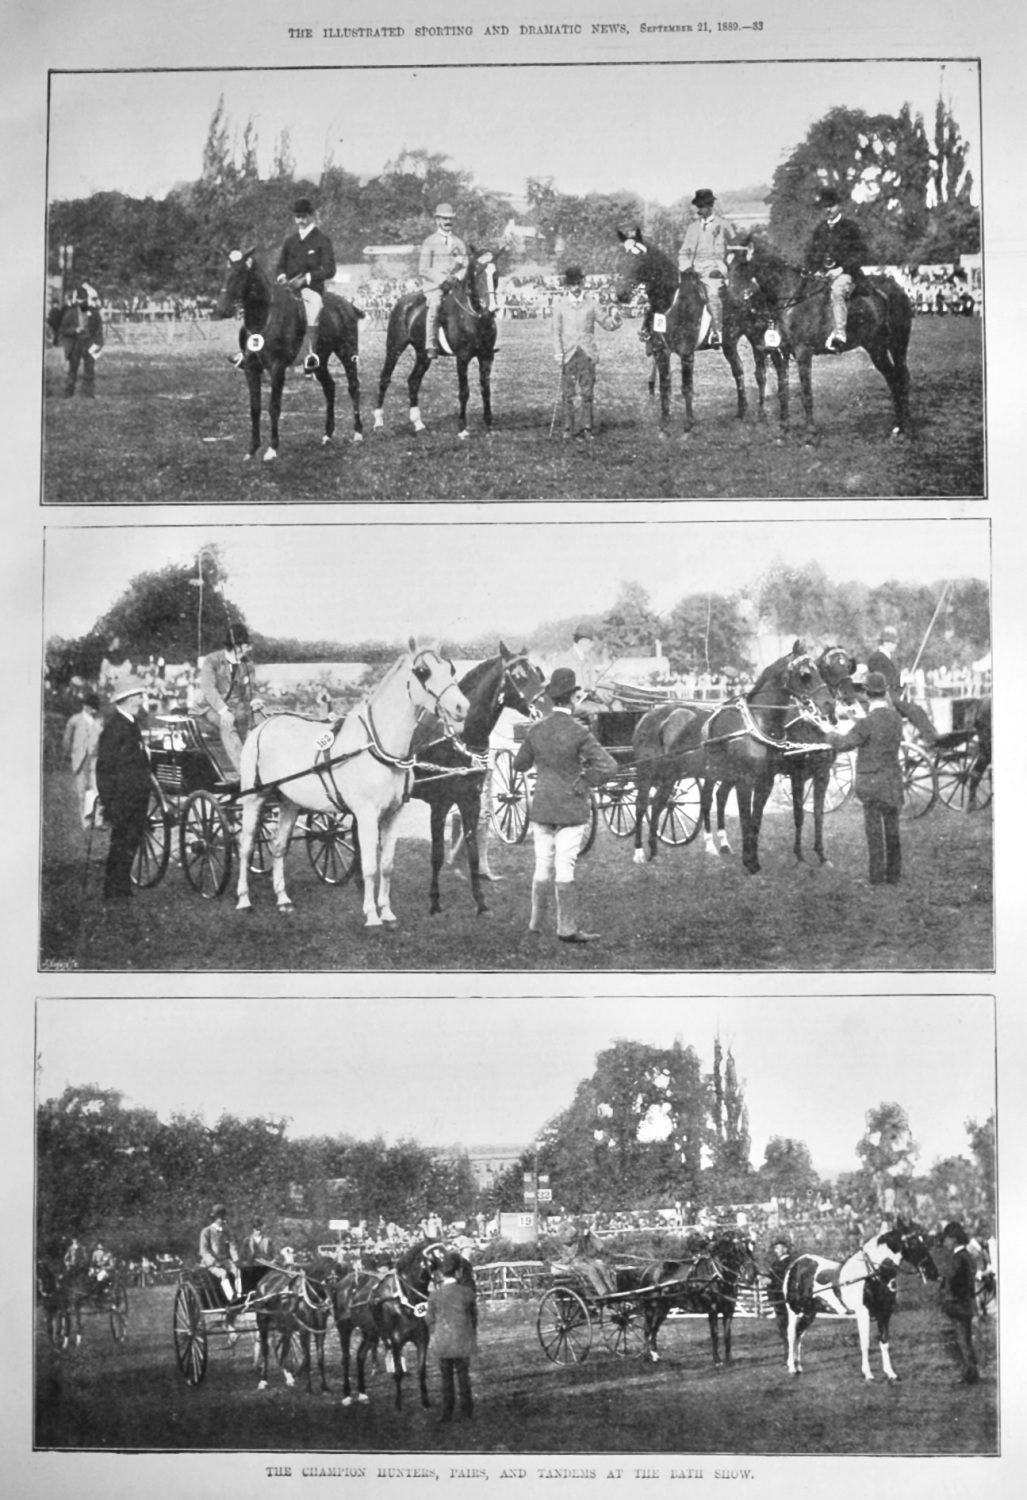 The Champion Hunters, Pairs, and Tandems at the Bath Show.  1889.